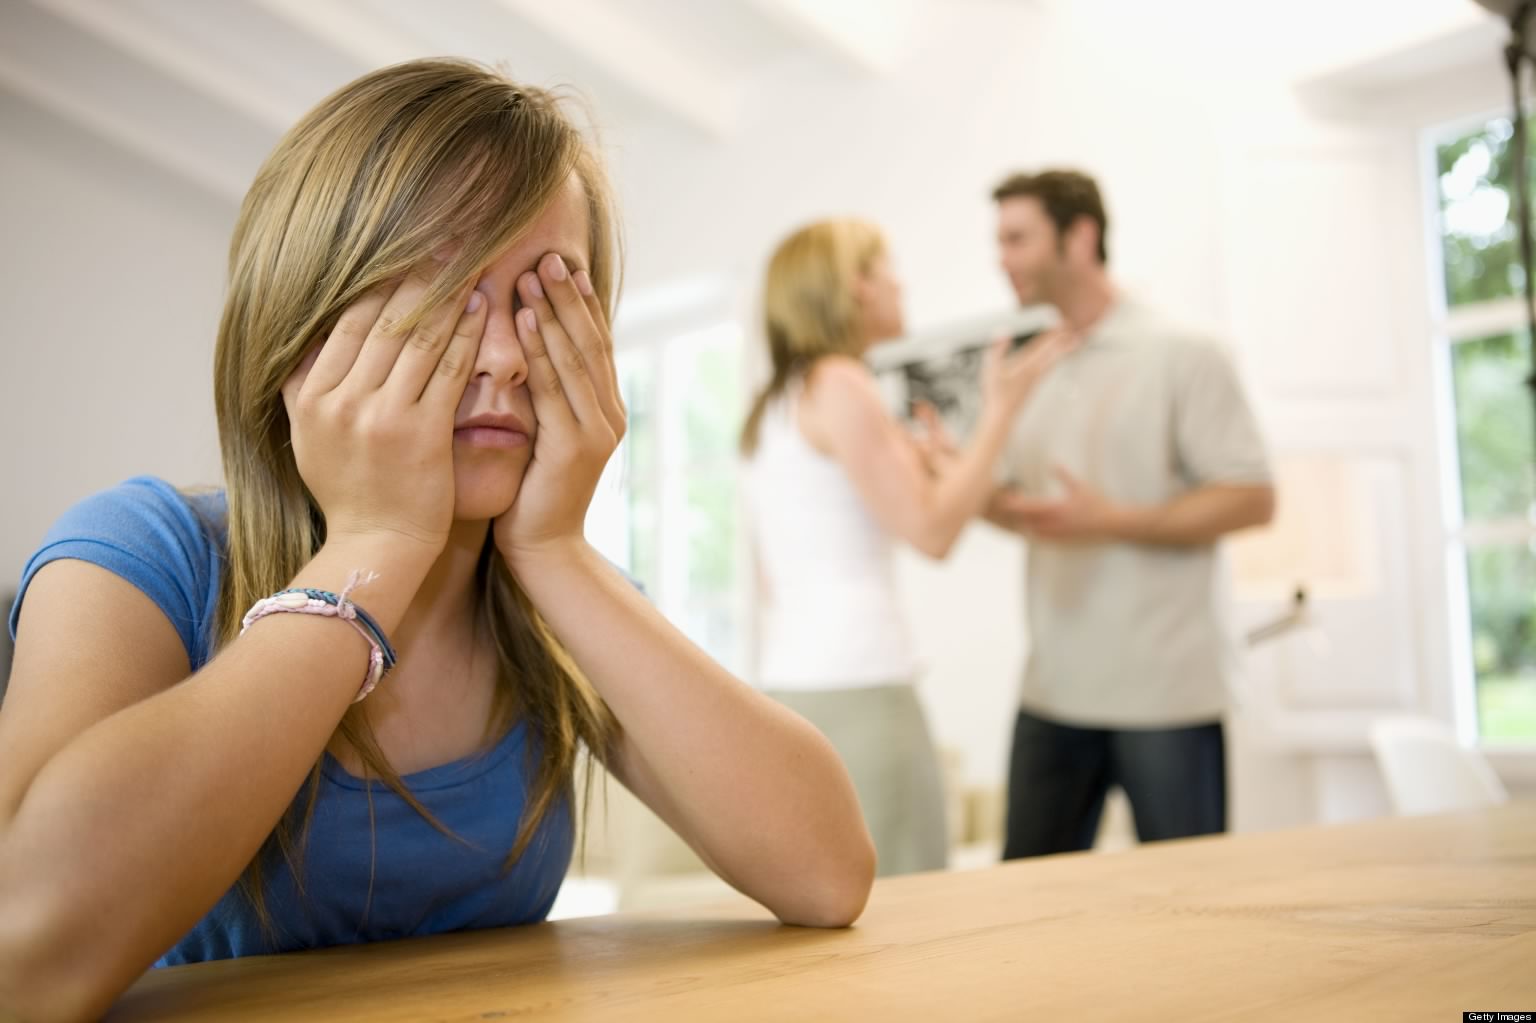 Girl with hands over face while parents argue in background